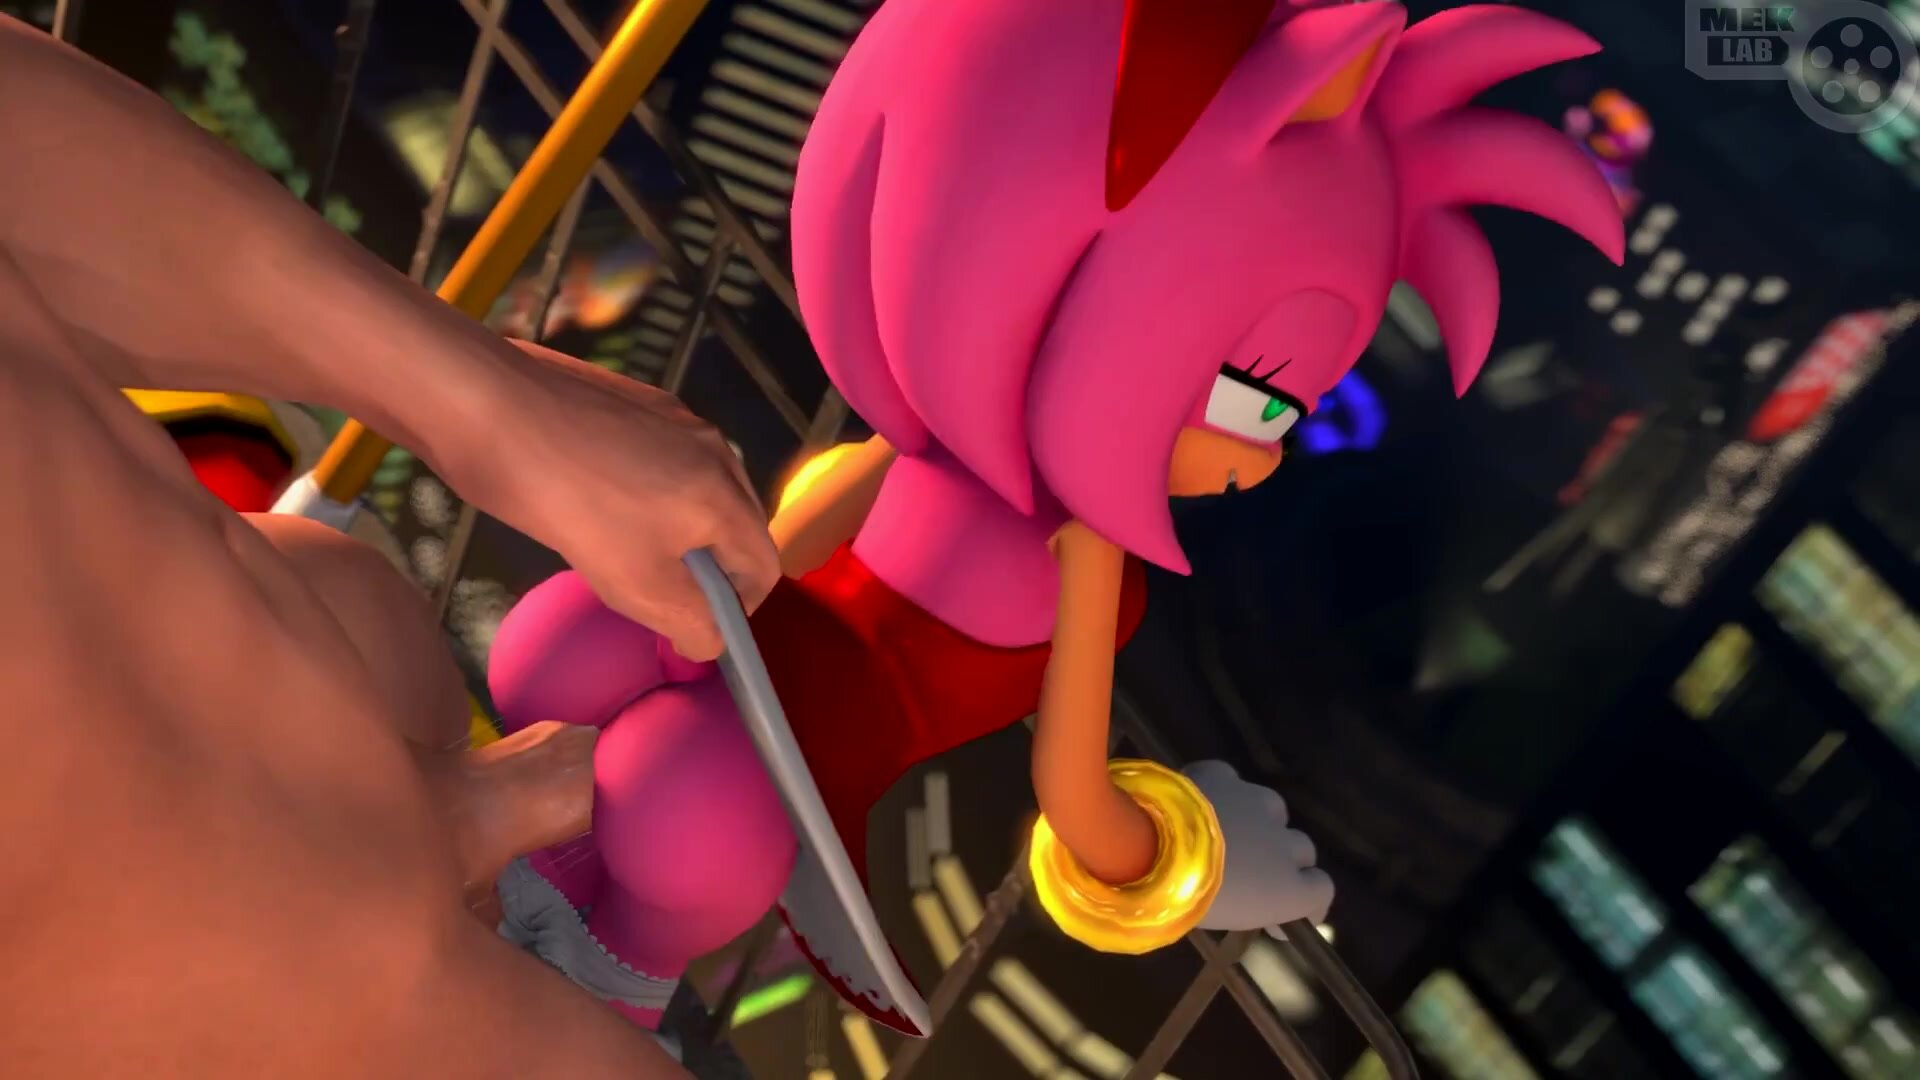 Amy Rose gets clapped on a balcony